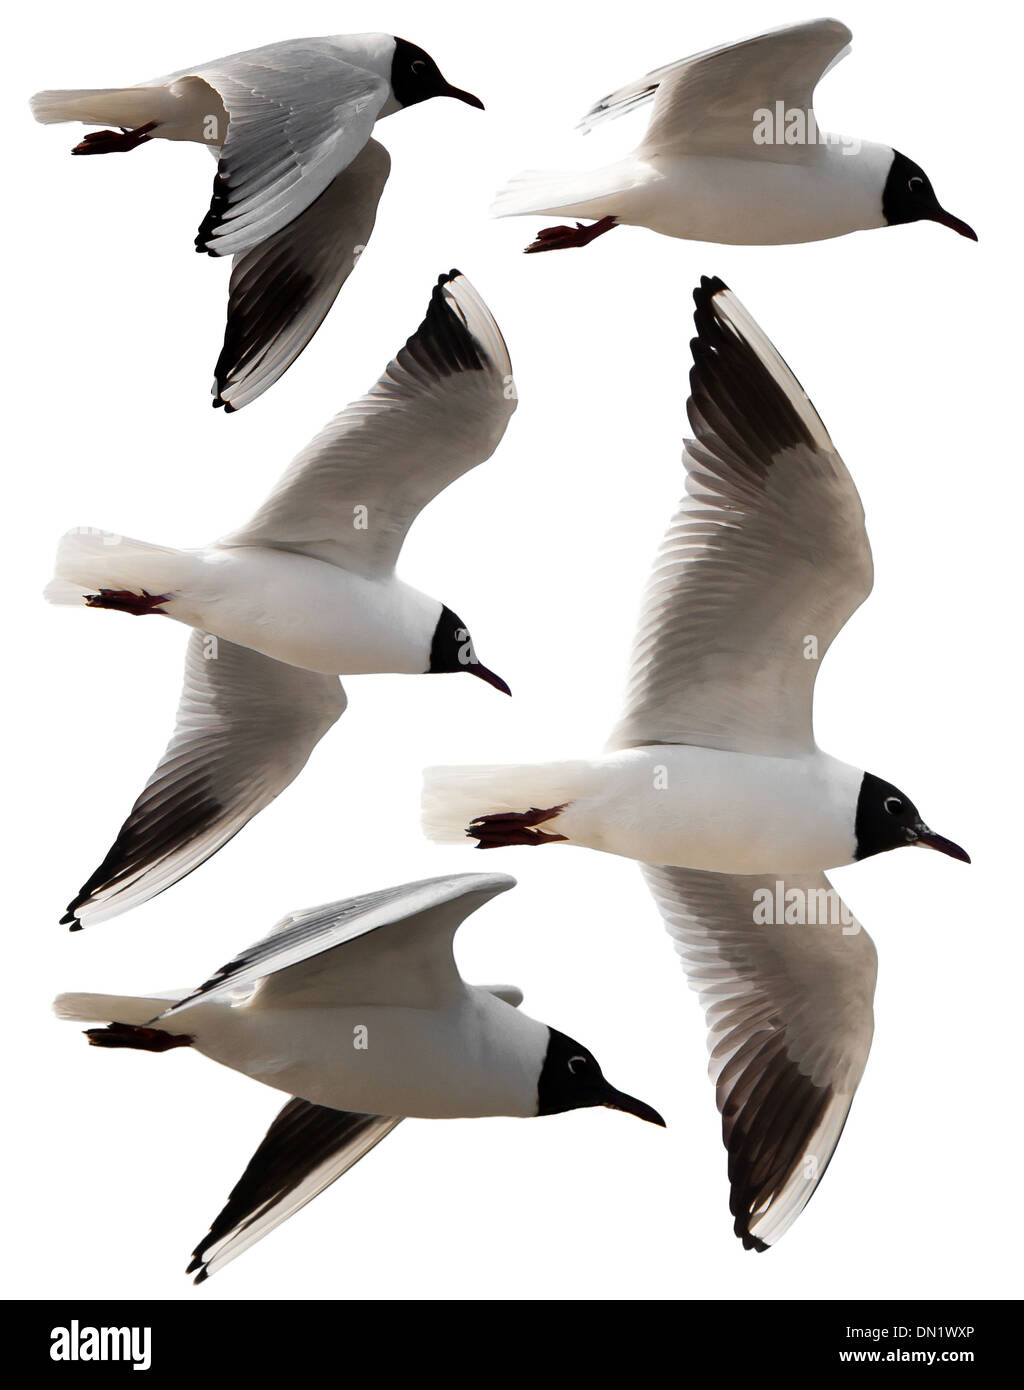 Isolated photo of five seagulls or mews flying around on white background Stock Photo